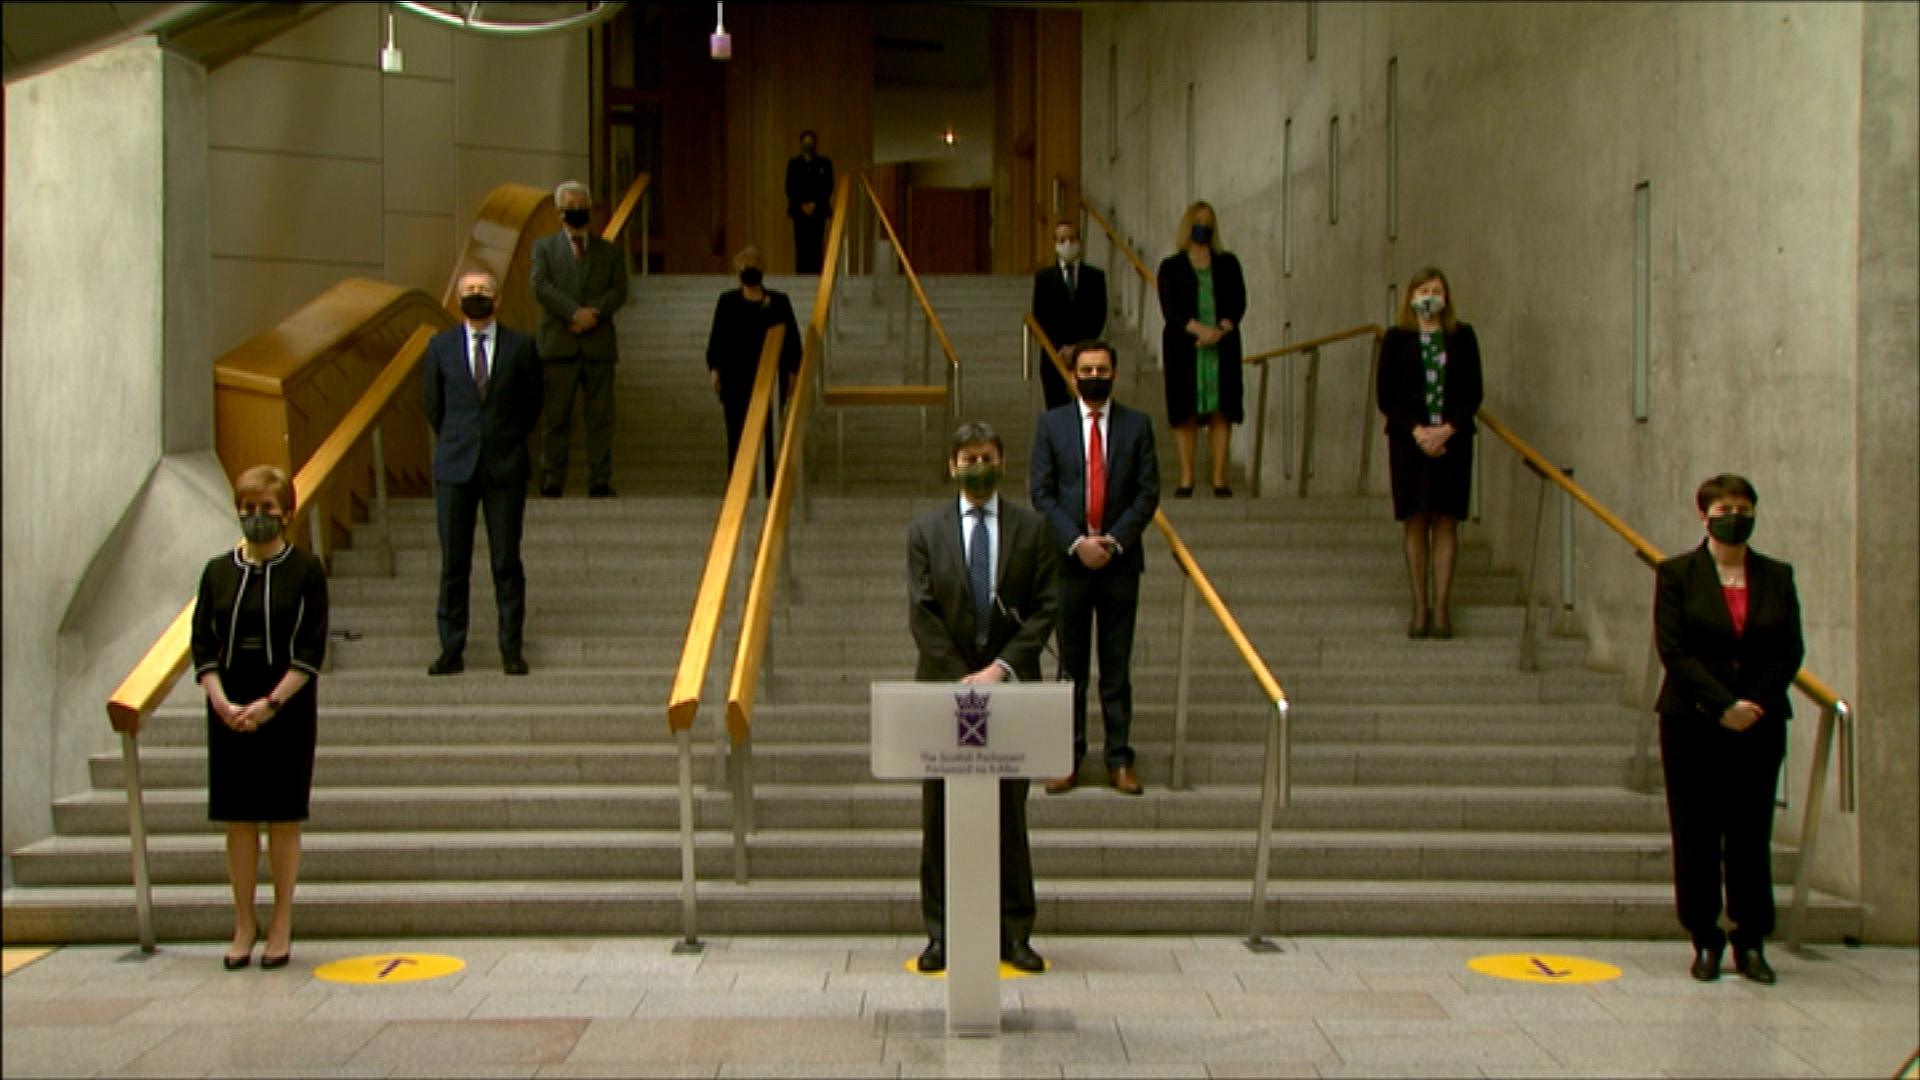 Party leaders gathered outside Holyrood to pay their respects.